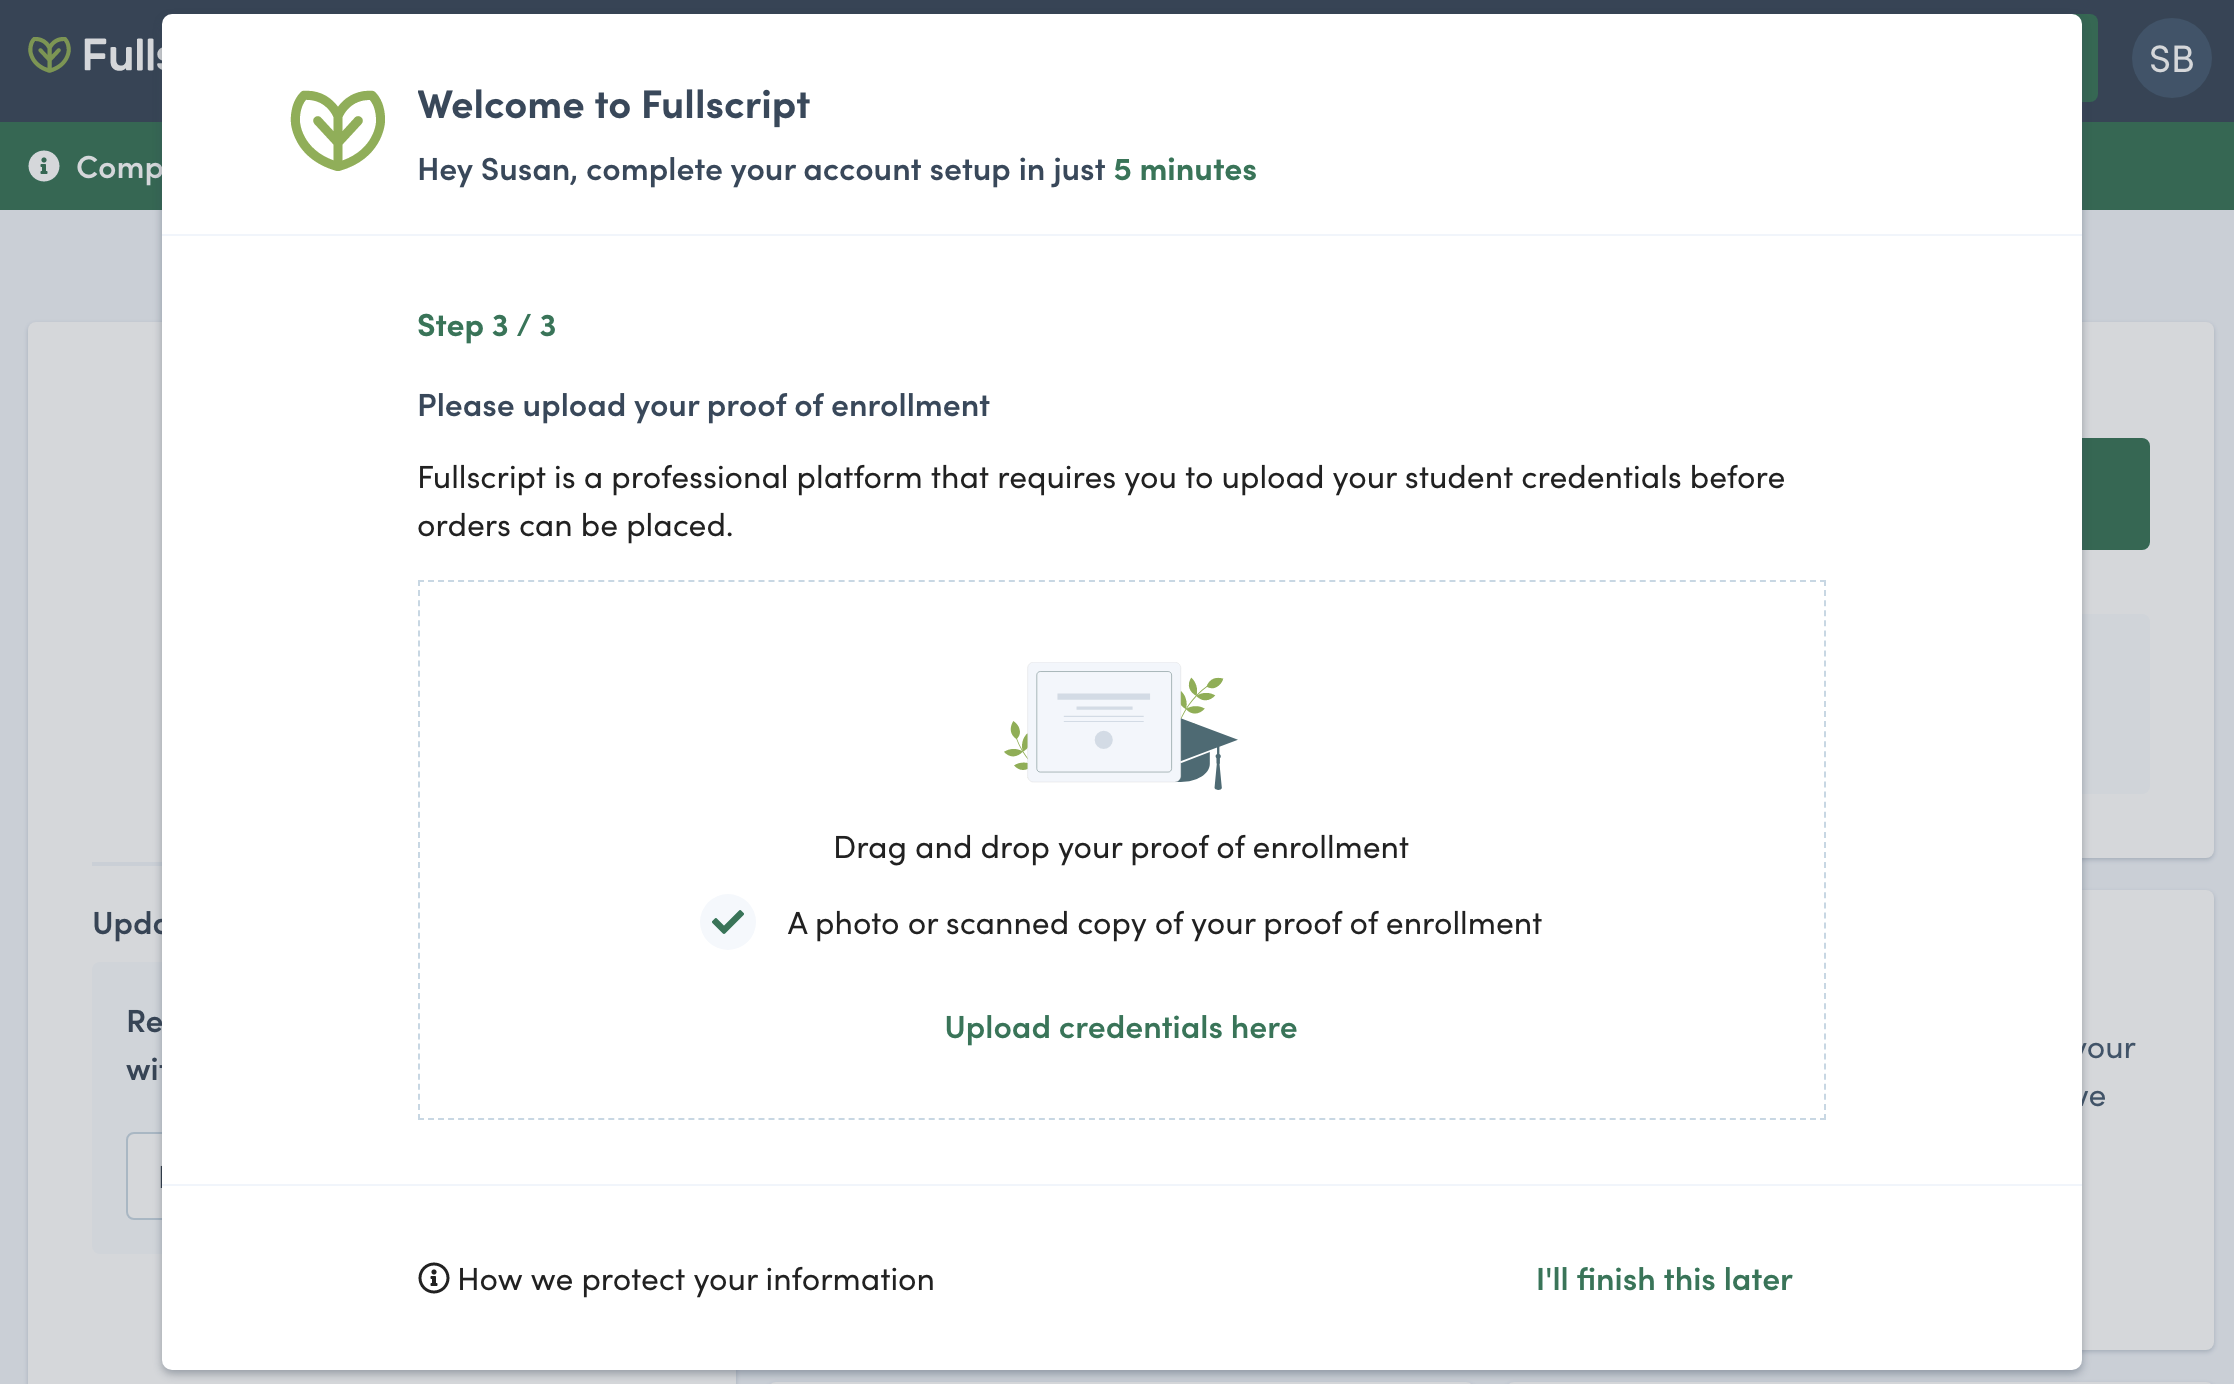 uploading student credentials to complete an account setup.